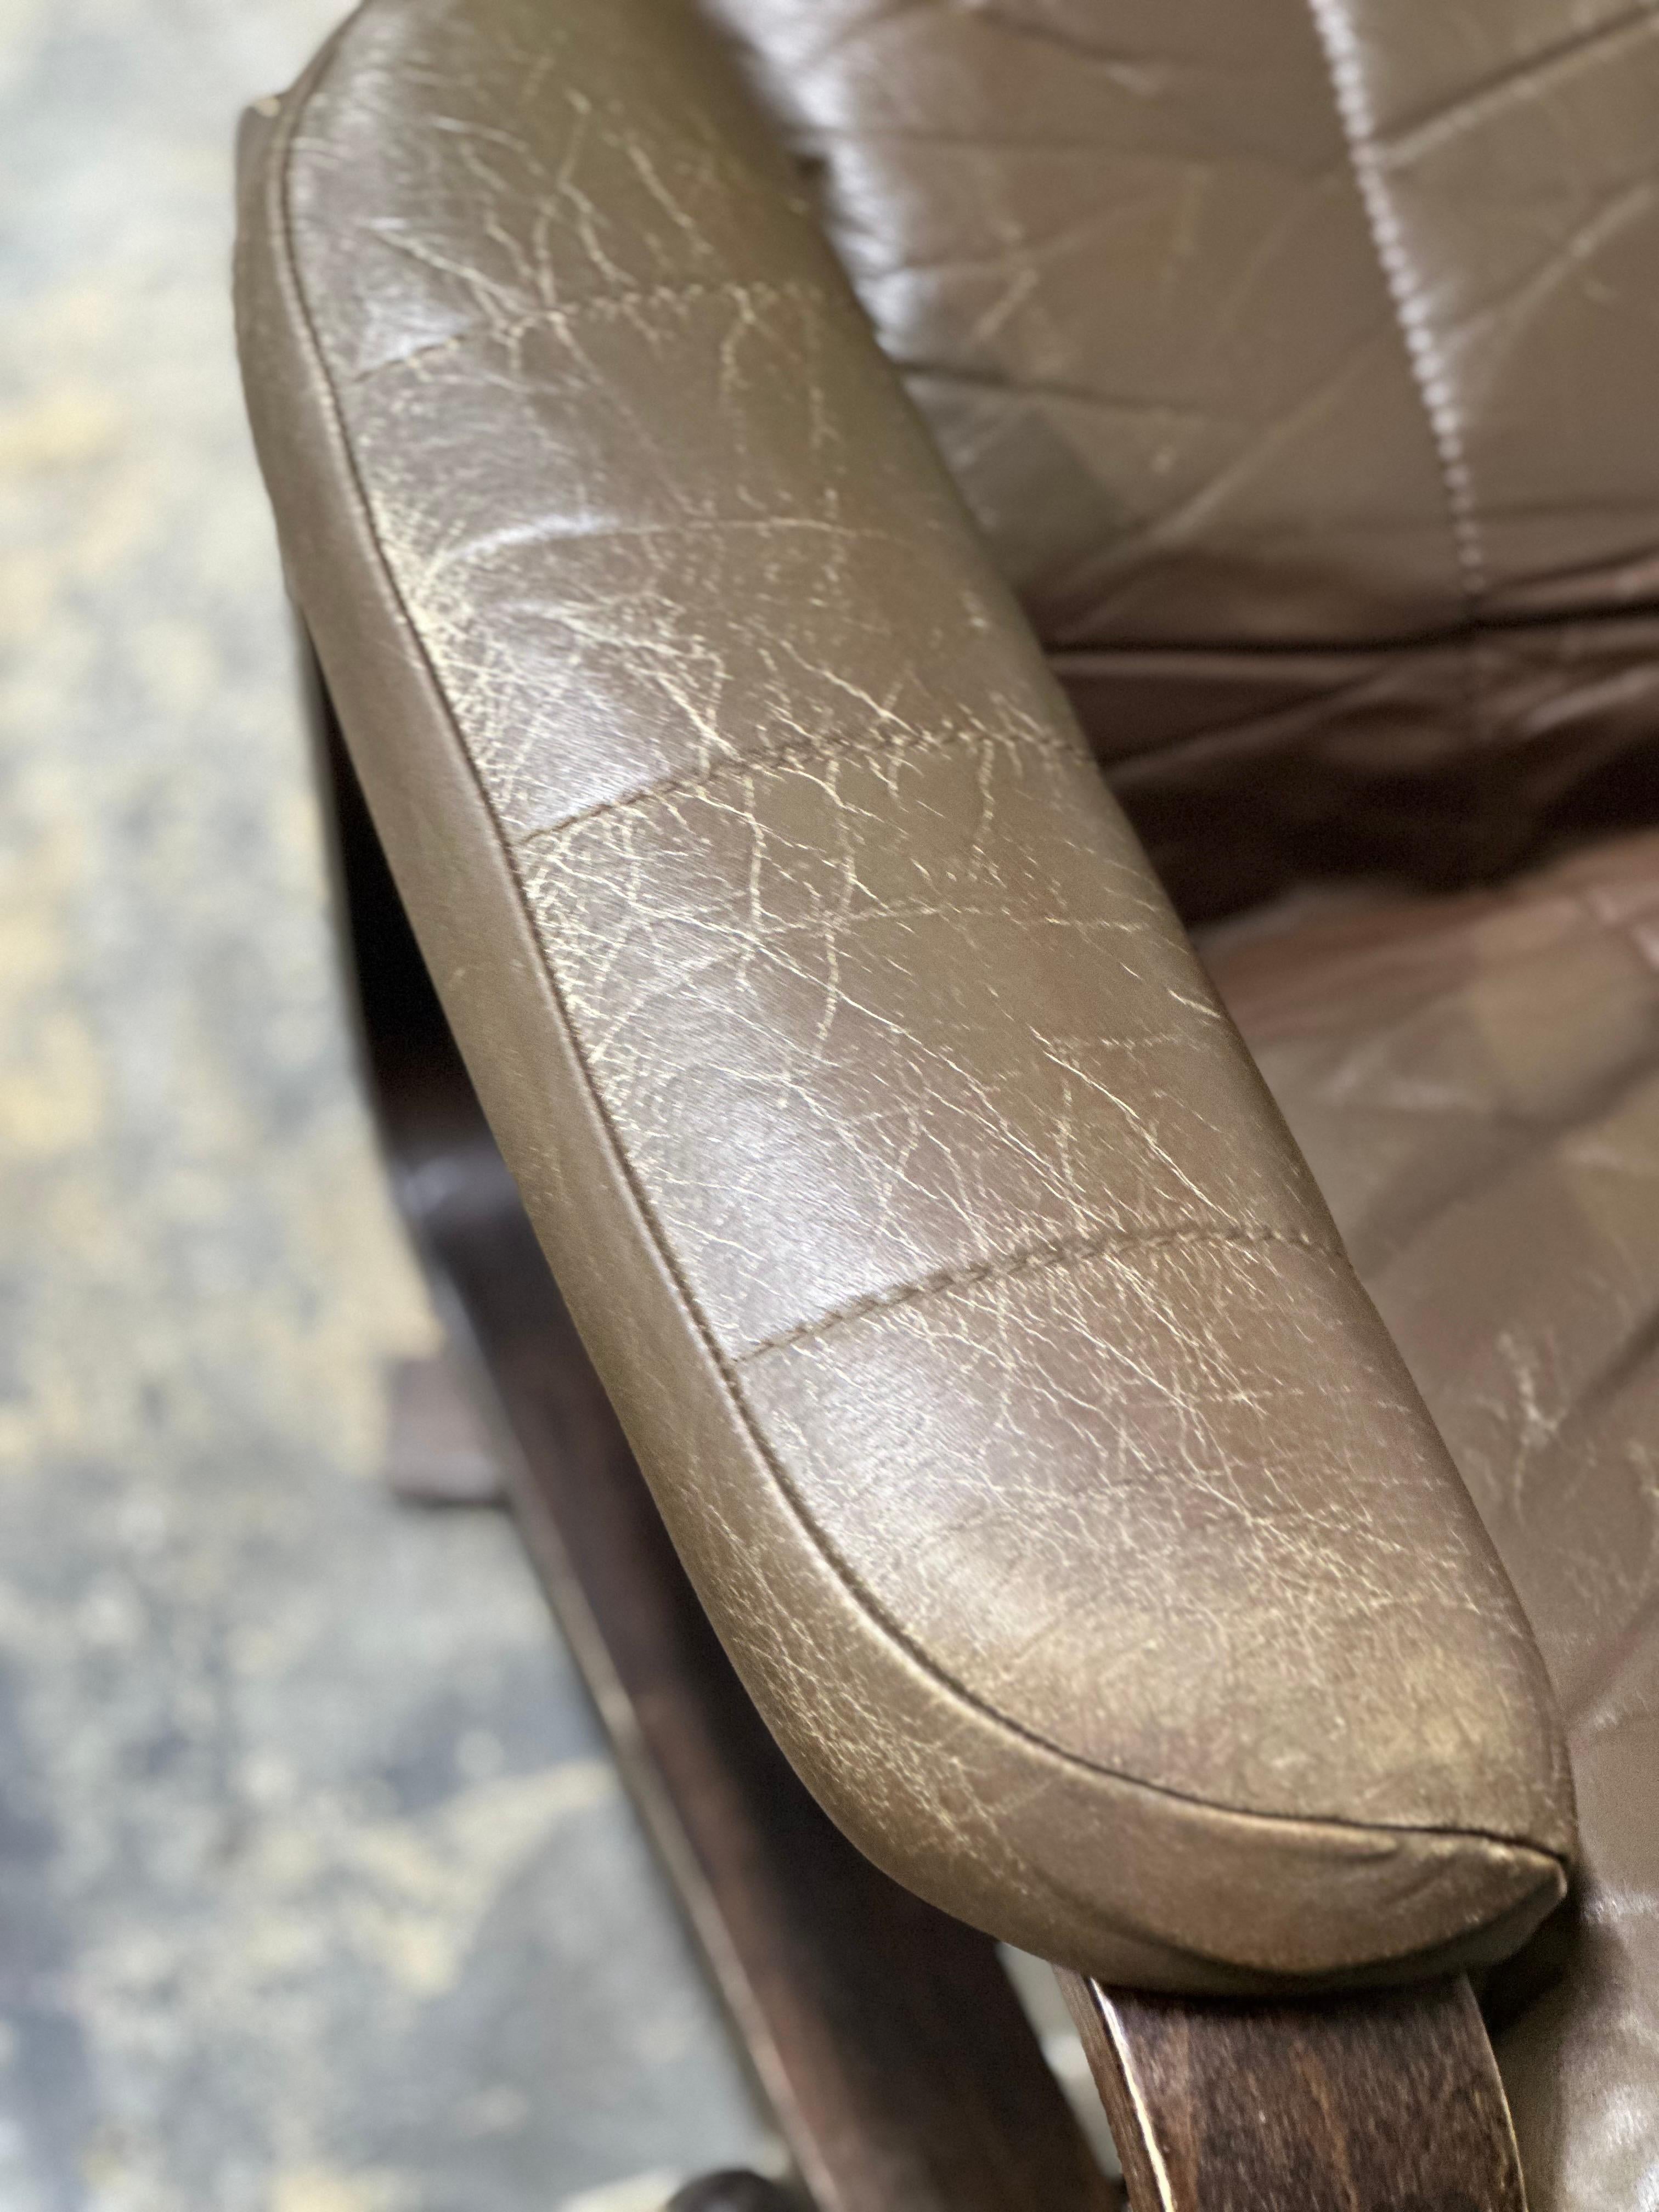 Reclining leather lounge chair and ottoman in excellent vintage condition with minor age-consistent wear. 

Ottoman measurements:
Approximately 16.5